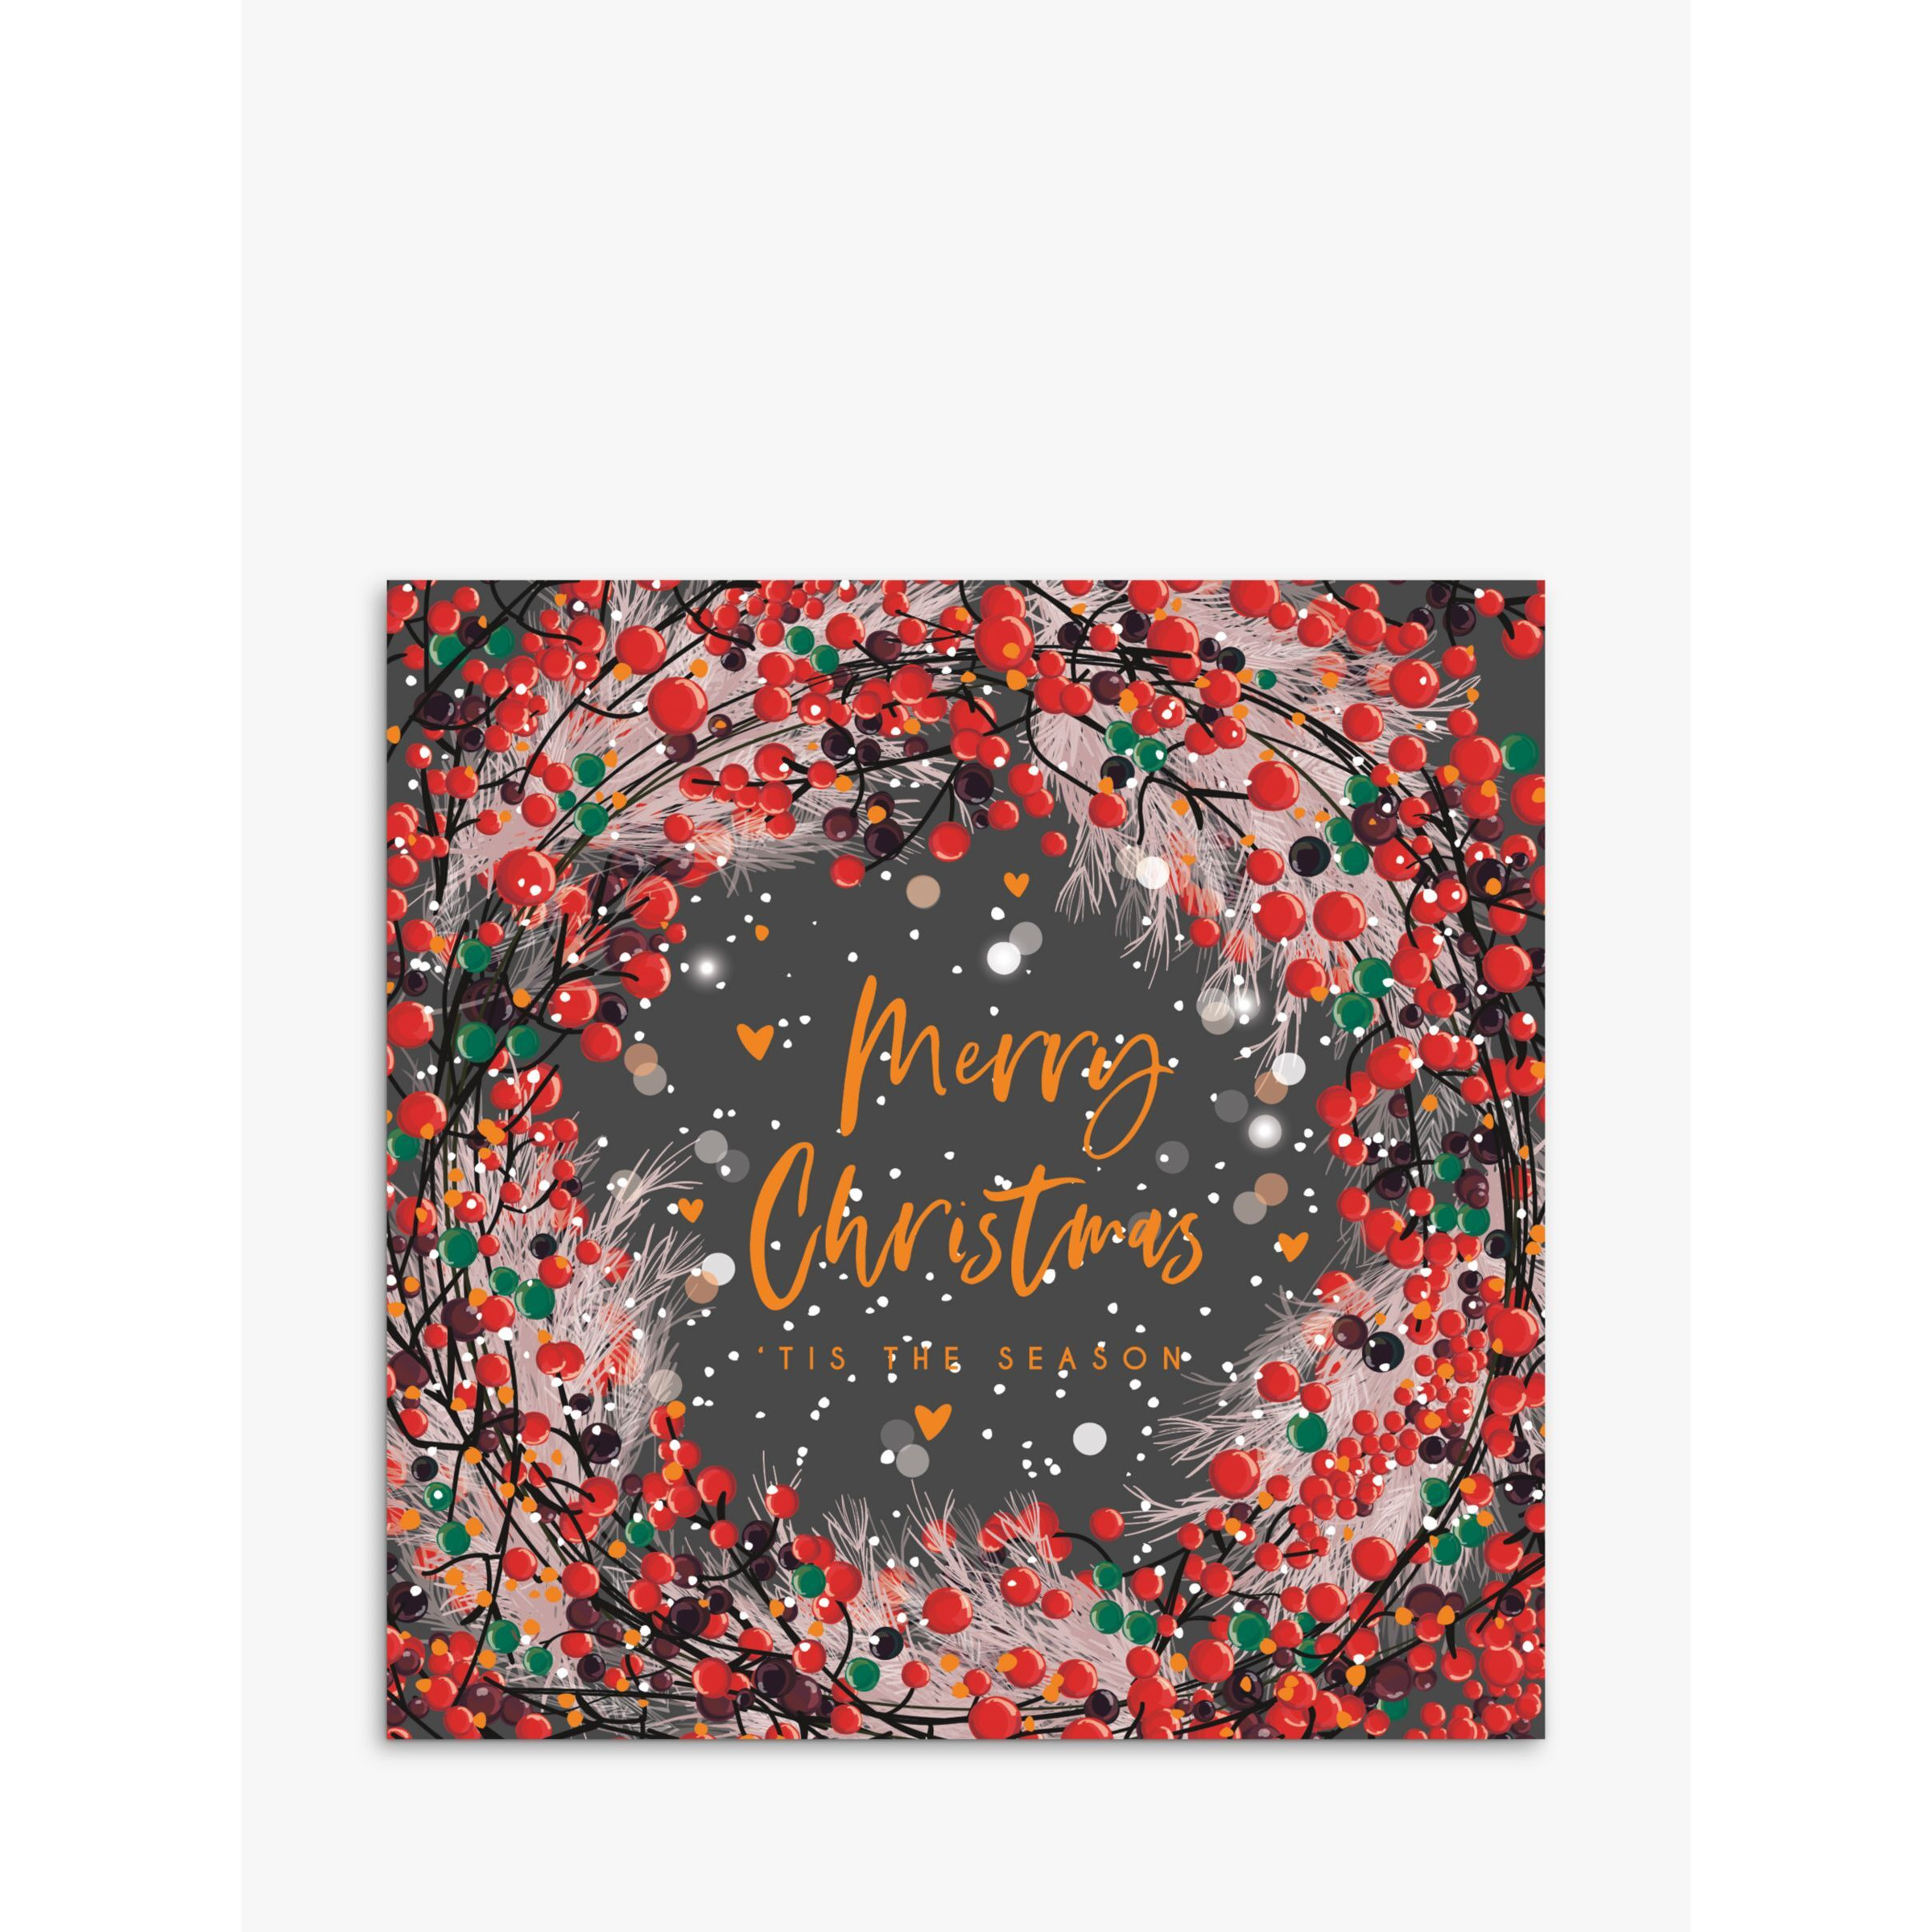 Belly Button Designs Berry Wreath Christmas Card